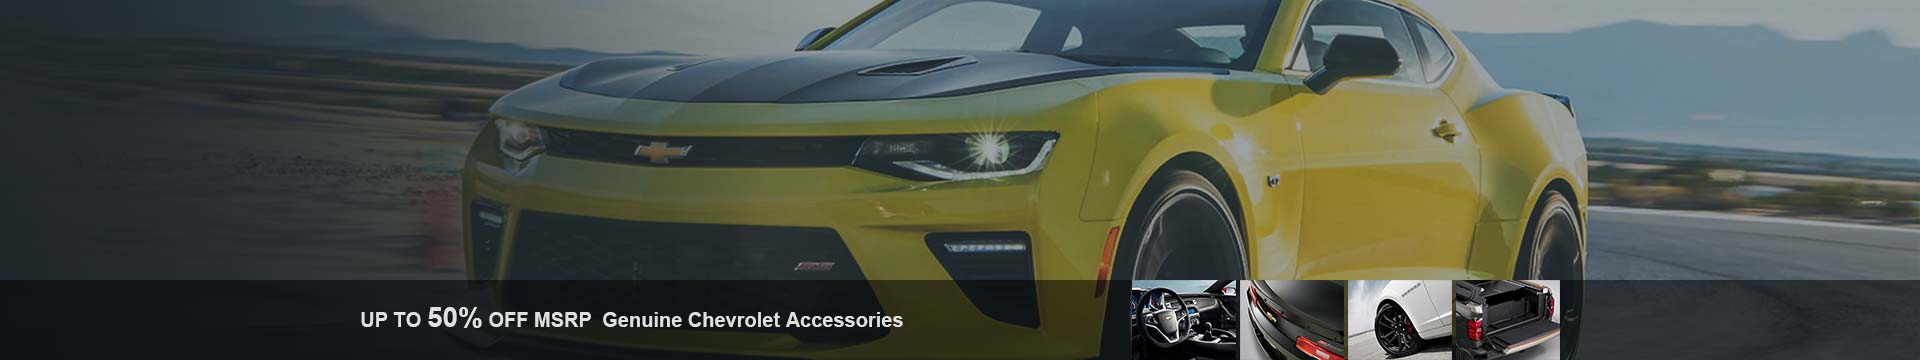 Shop Chevrolet Uplander accessories with lowest prices